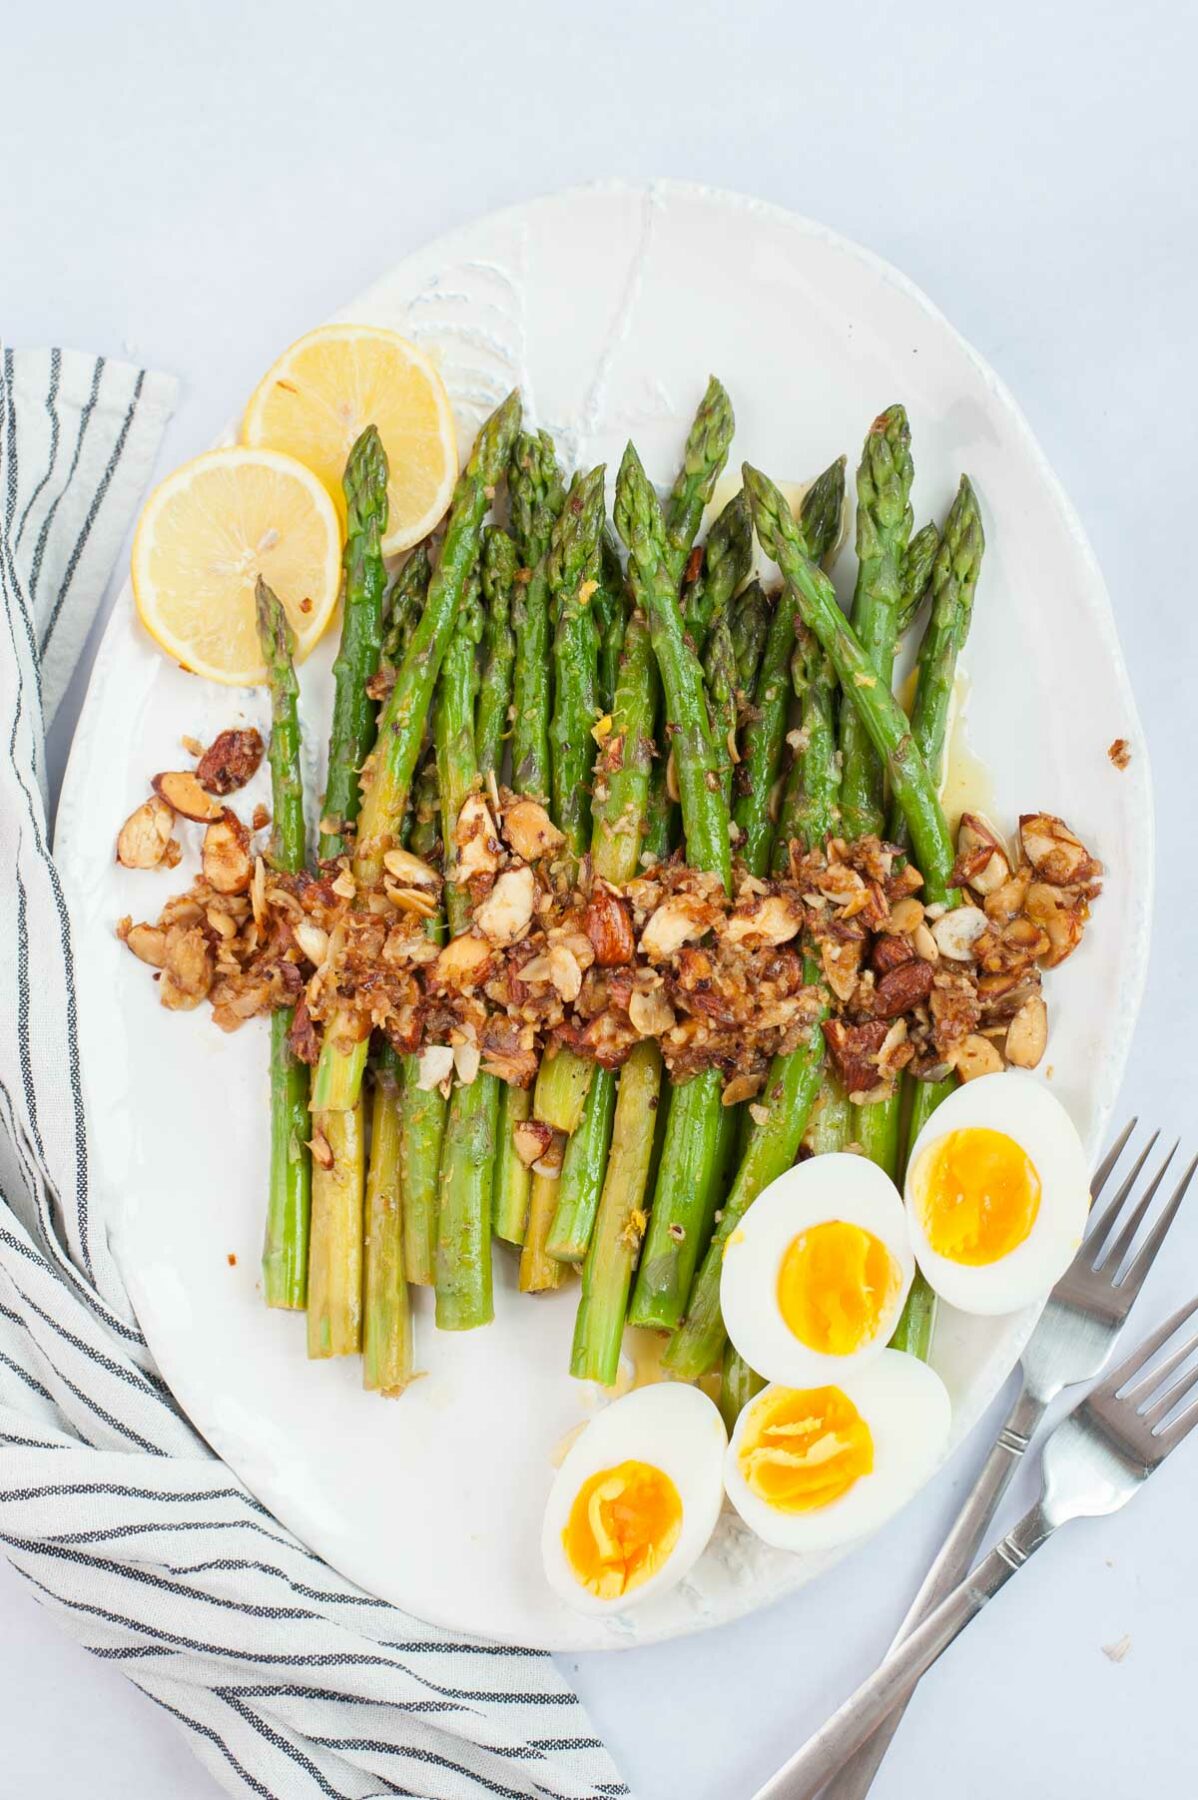 Asparagus almondine on a white plate with lemon slices and halved eggs on the side.